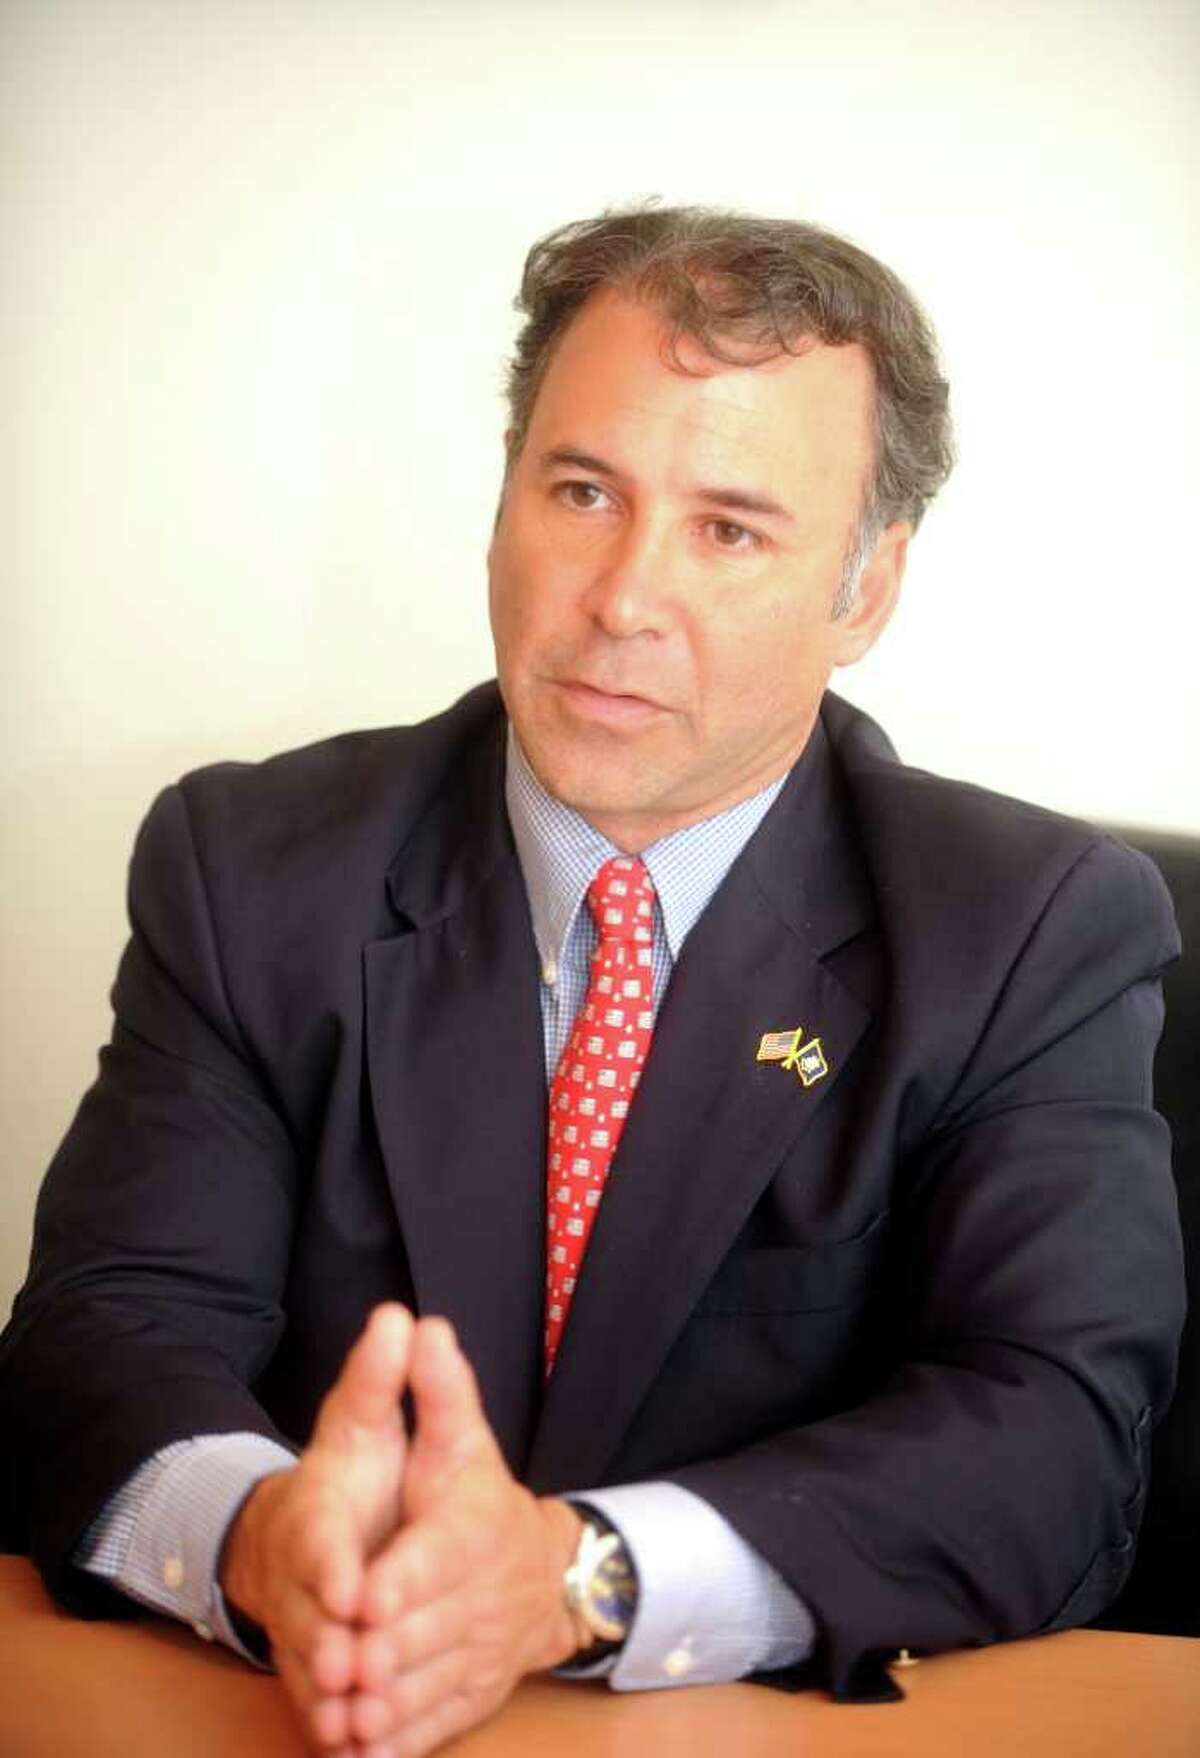 State Rep. Fred Camillo, R-151st District, shown in October 2010.